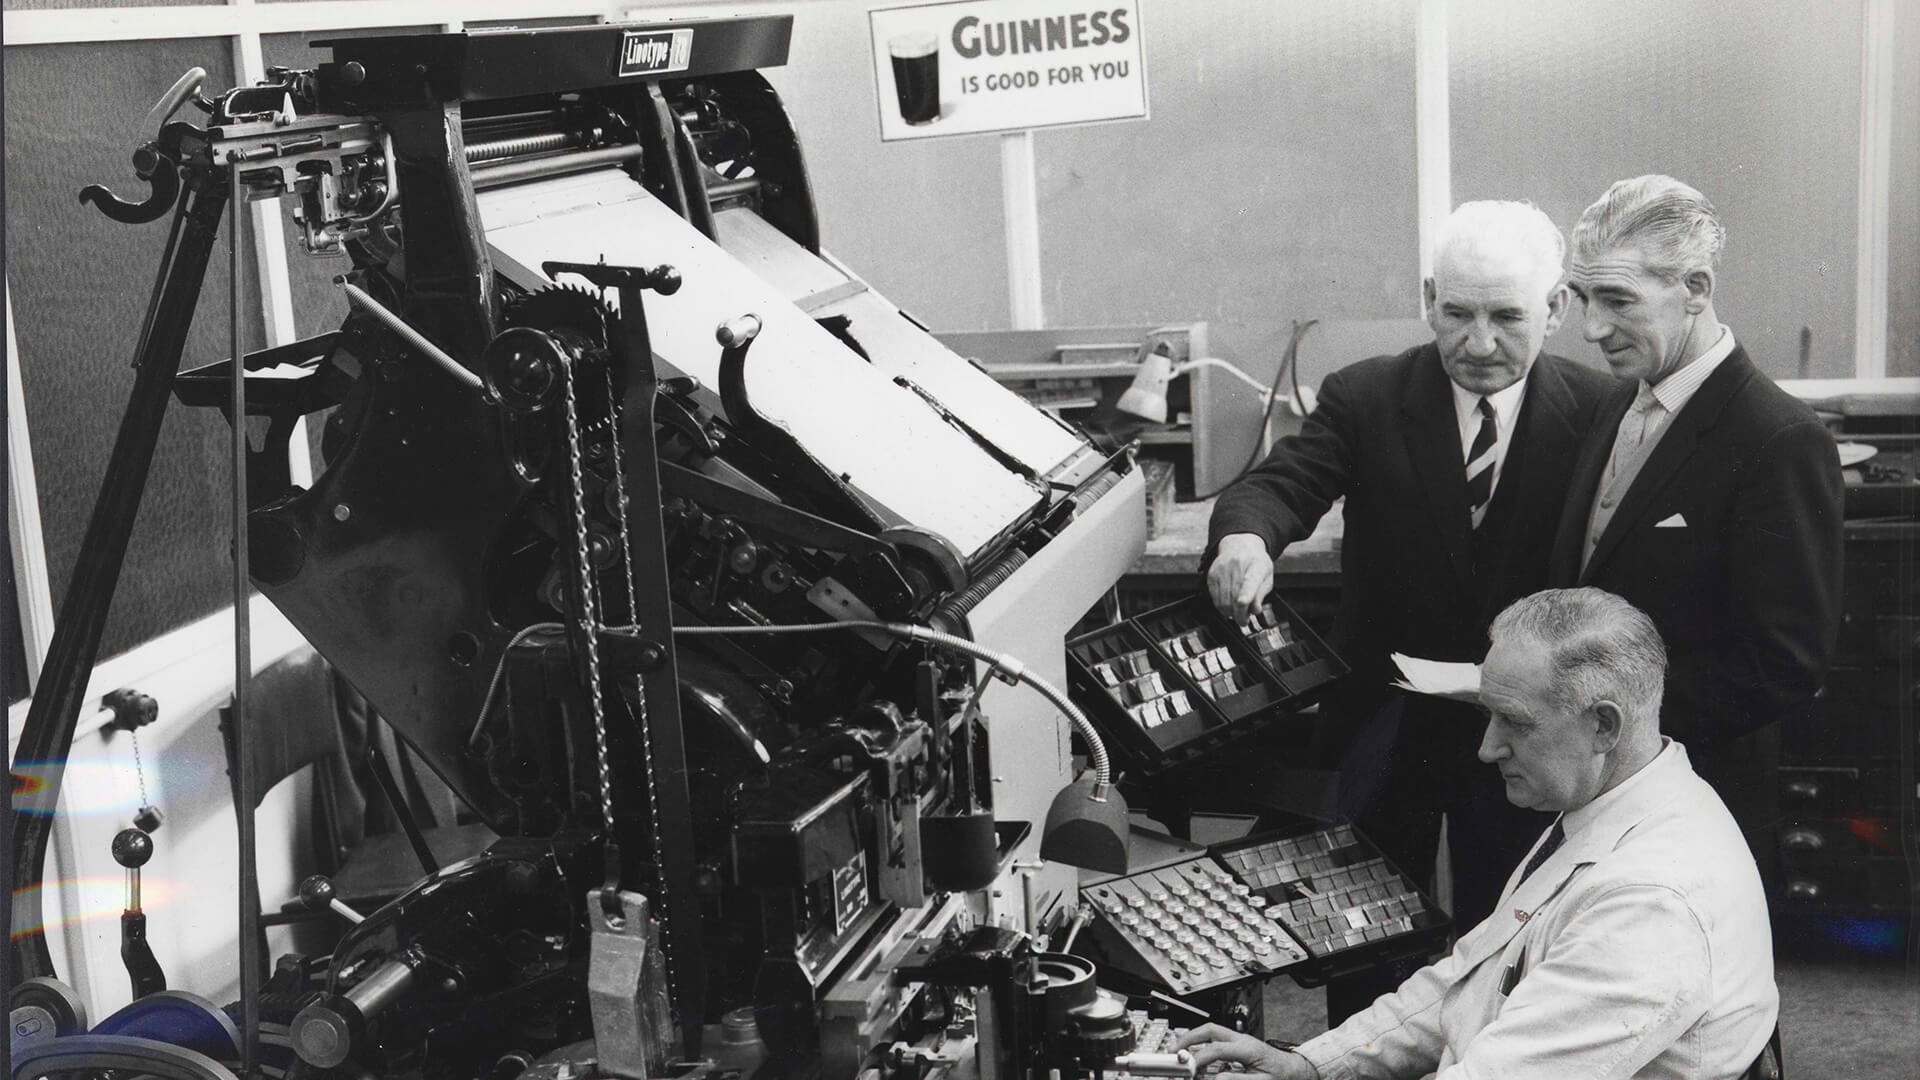 A black-and-white historical shot shows three men working on the Guinness Printworks Linotype Machine